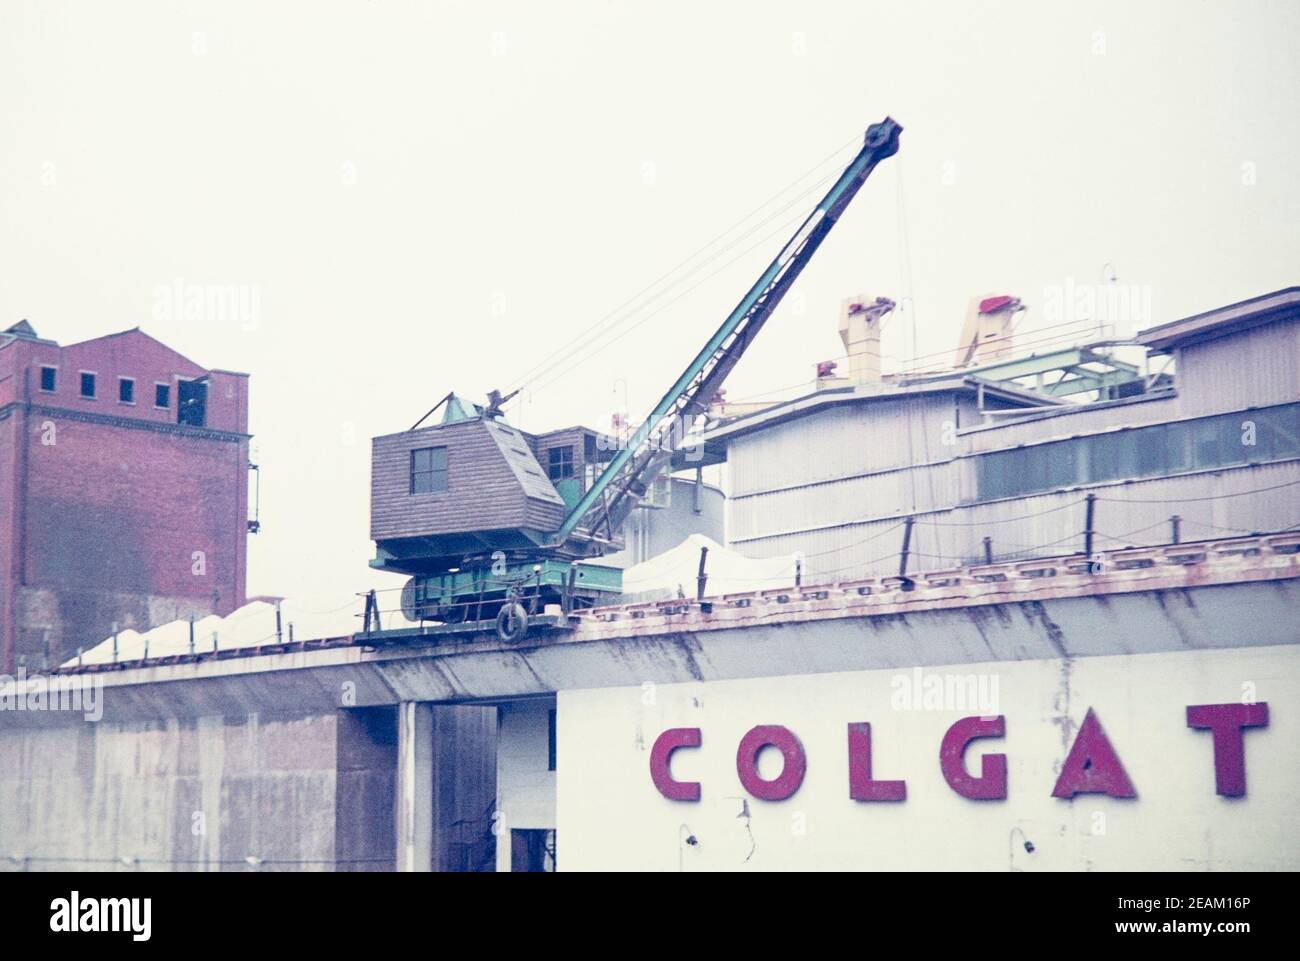 1973 Manchester Salford -  Colgate Palmolive Factory, Colgate, which produced toothpaste, Ajax detergent, and Palmolive dishwasher liquid, was a key employer near the docks on Ordsall Lane, the site of the factory was turned into the Soapworks at Salford Quays. Salford, Greater Manchester, England, GB,UK,Europe Stock Photo